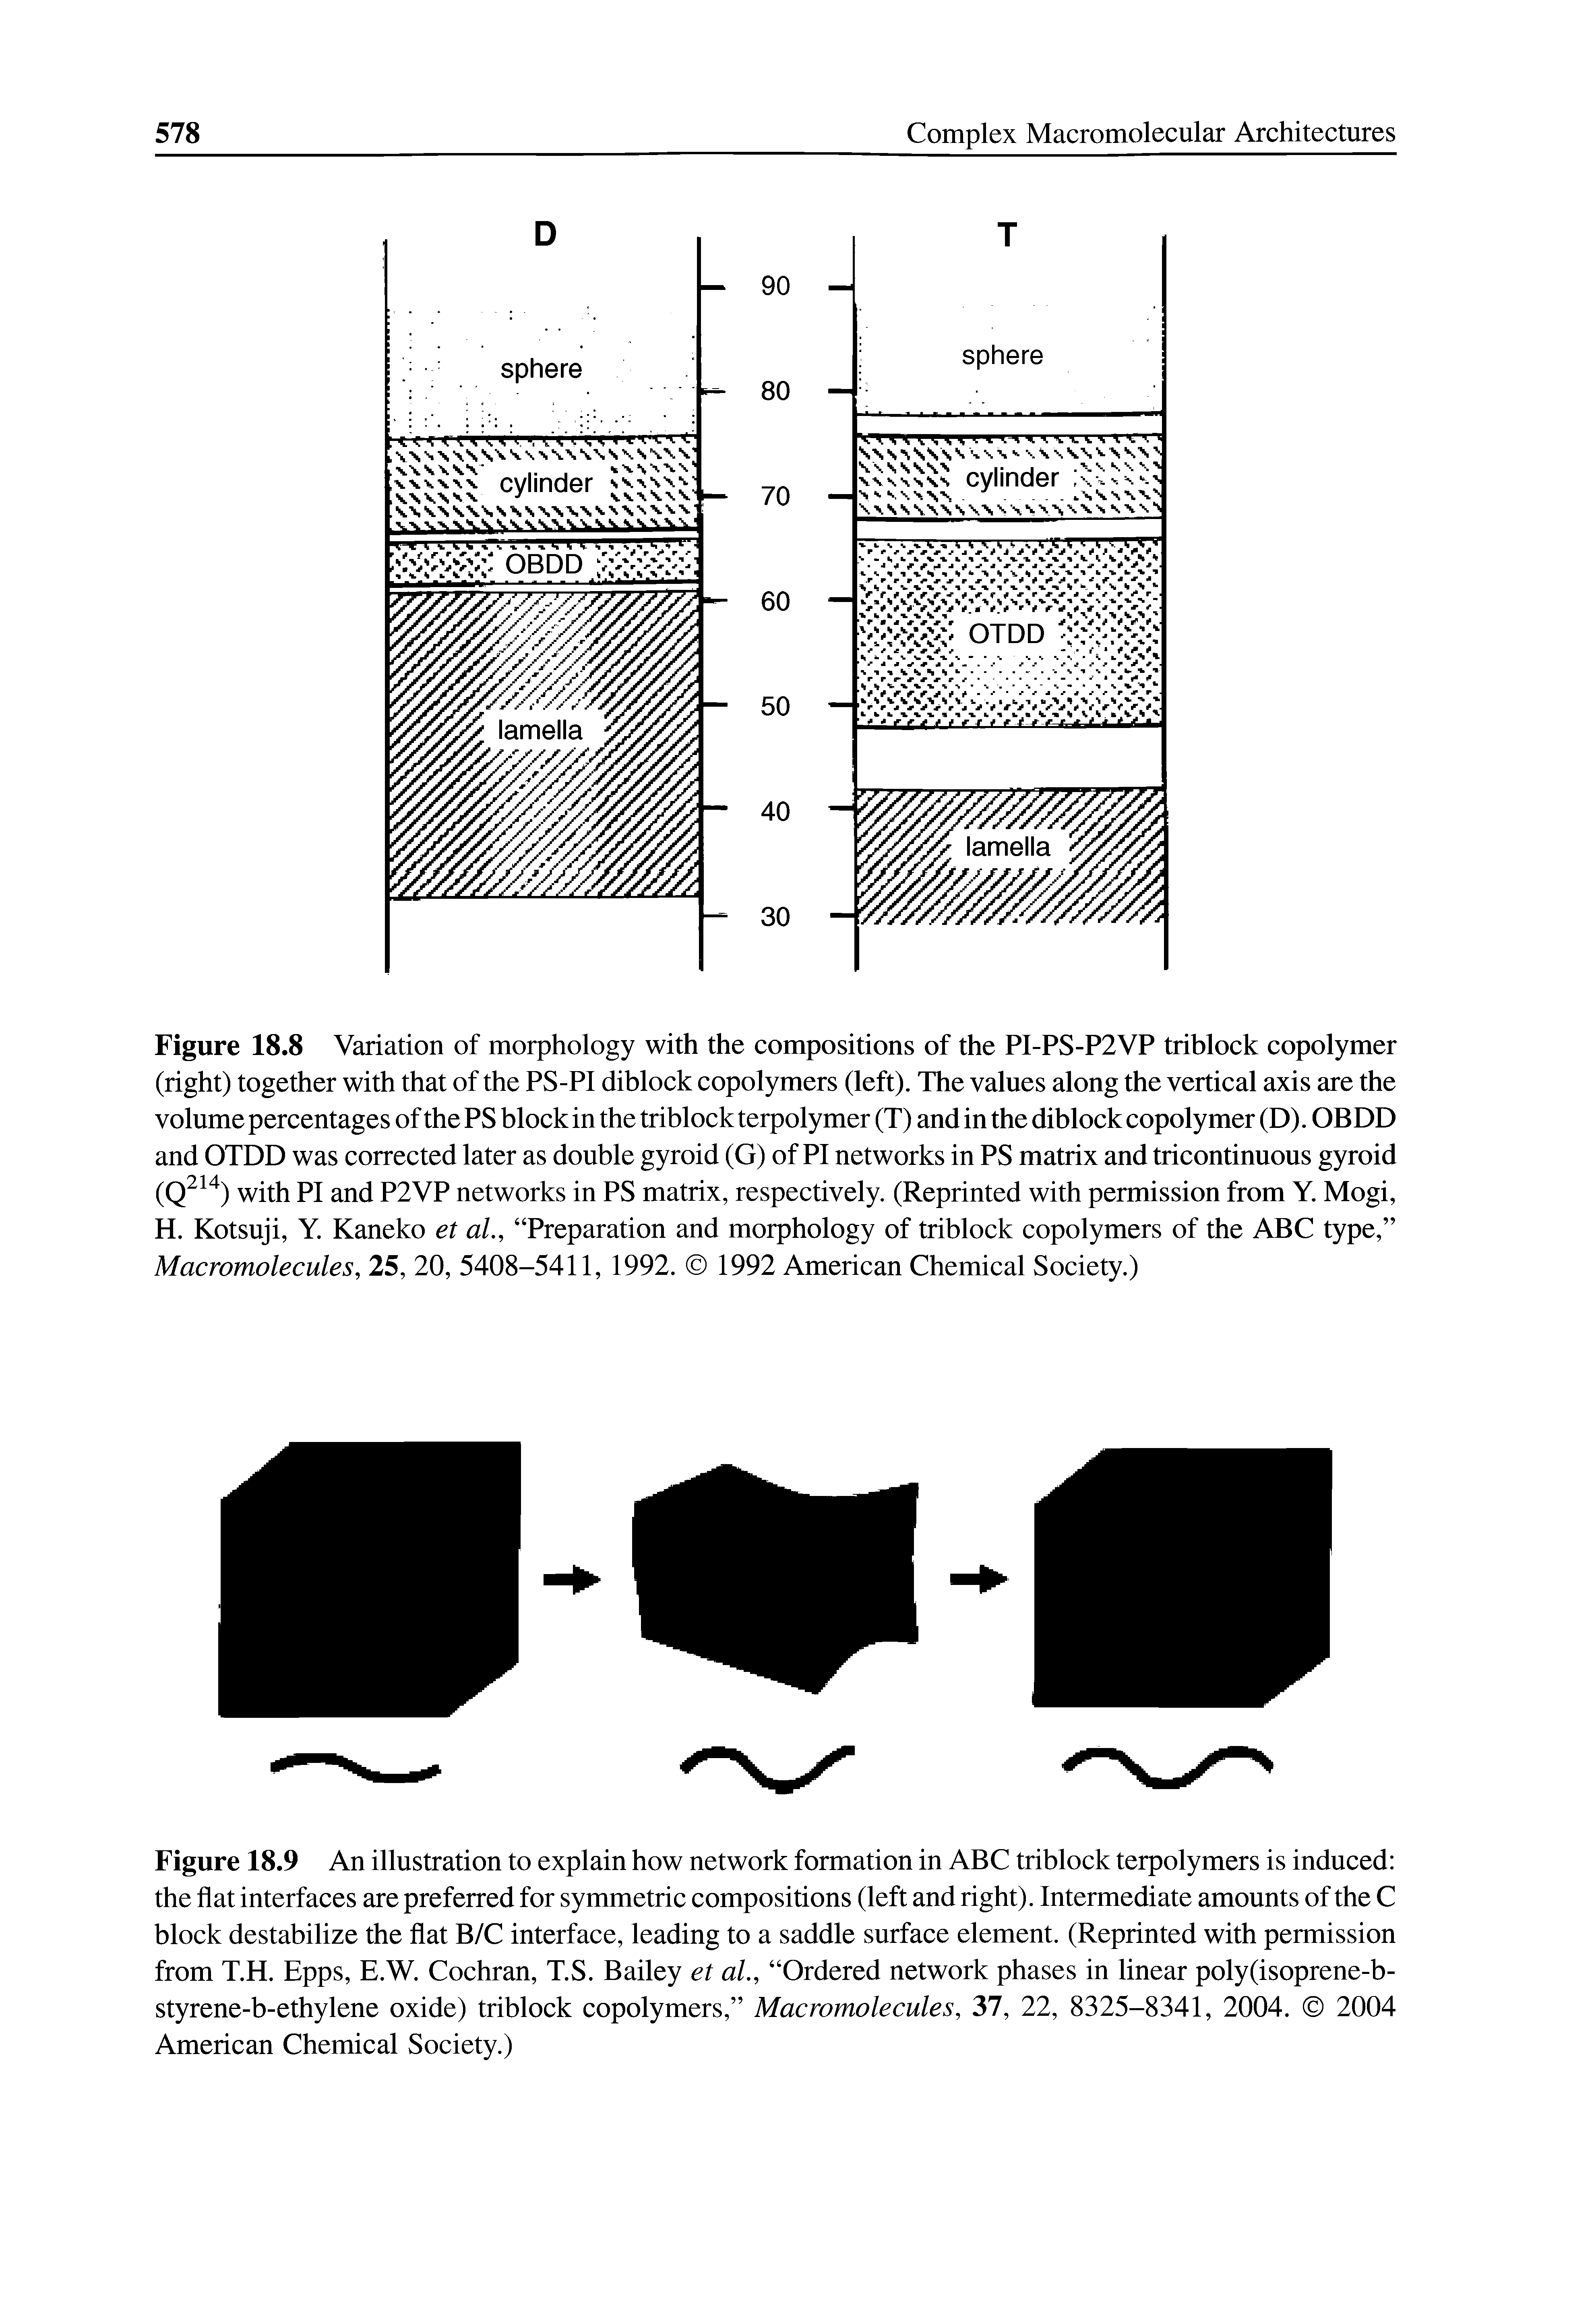 Figure 18.9 An illustration to explain how network formation in ABC triblock terpolymers is induced the flat interfaces are preferred for symmetric compositions (left and right). Intermediate amounts of the C block destabilize the flat B/C interface, leading to a saddle surface element. (Reprinted with permission from T.H. Epps, E.W. Cochran, T.S. Bailey et al., Ordered network phases in linear poly(isoprene-b-styrene-b-ethylene oxide) triblock copolymers, Macromolecules, 37, 22, 8325-8341, 2004. 2004 American Chemical Society.)...